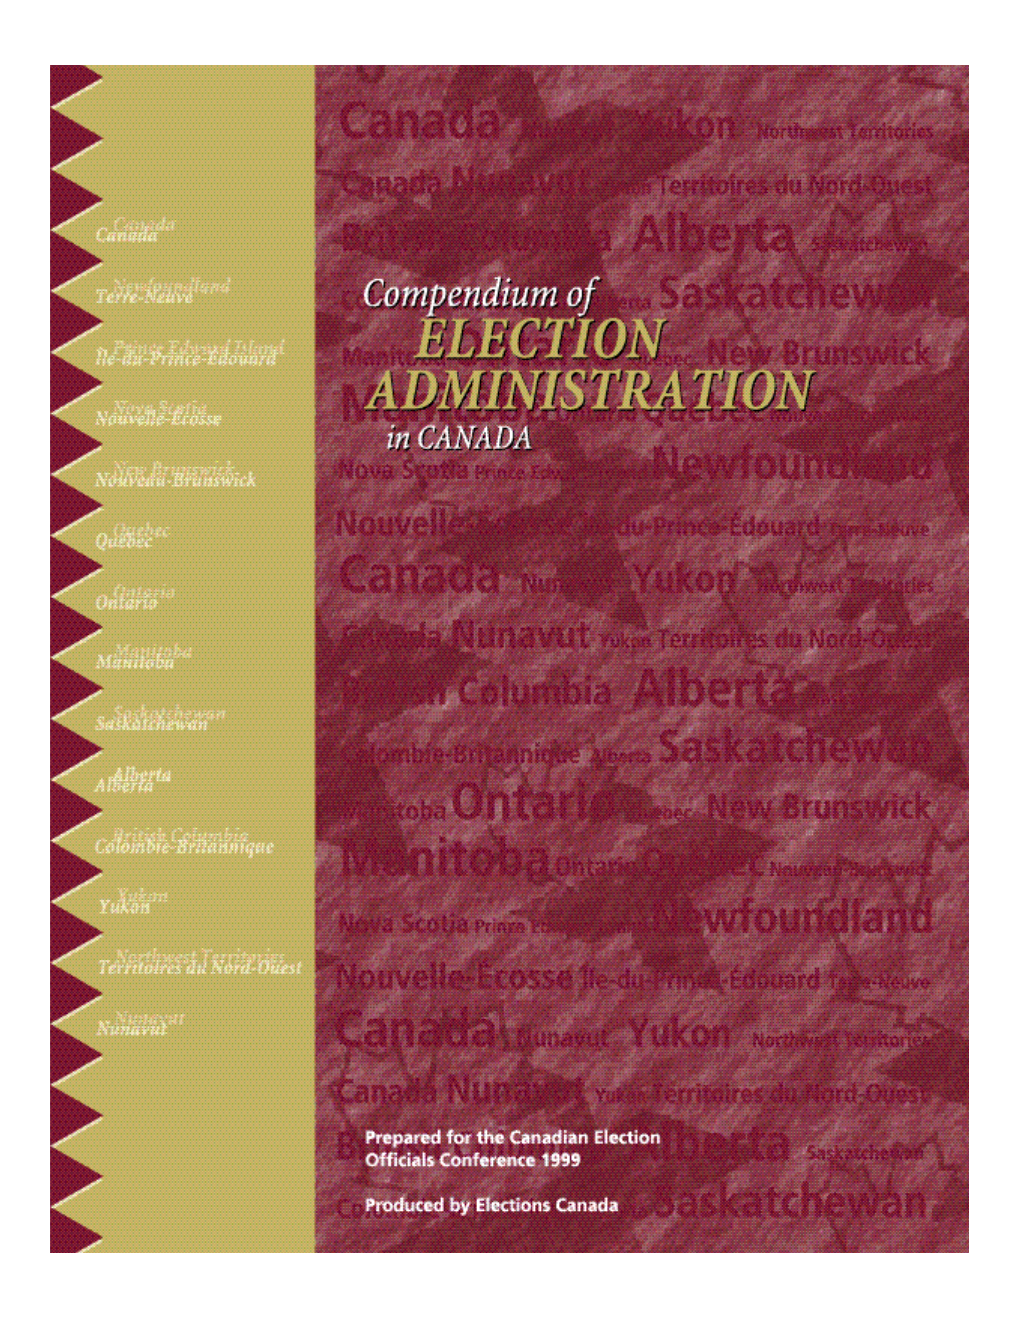 Compendium of ELECTION ADMINISTRATION in Canada